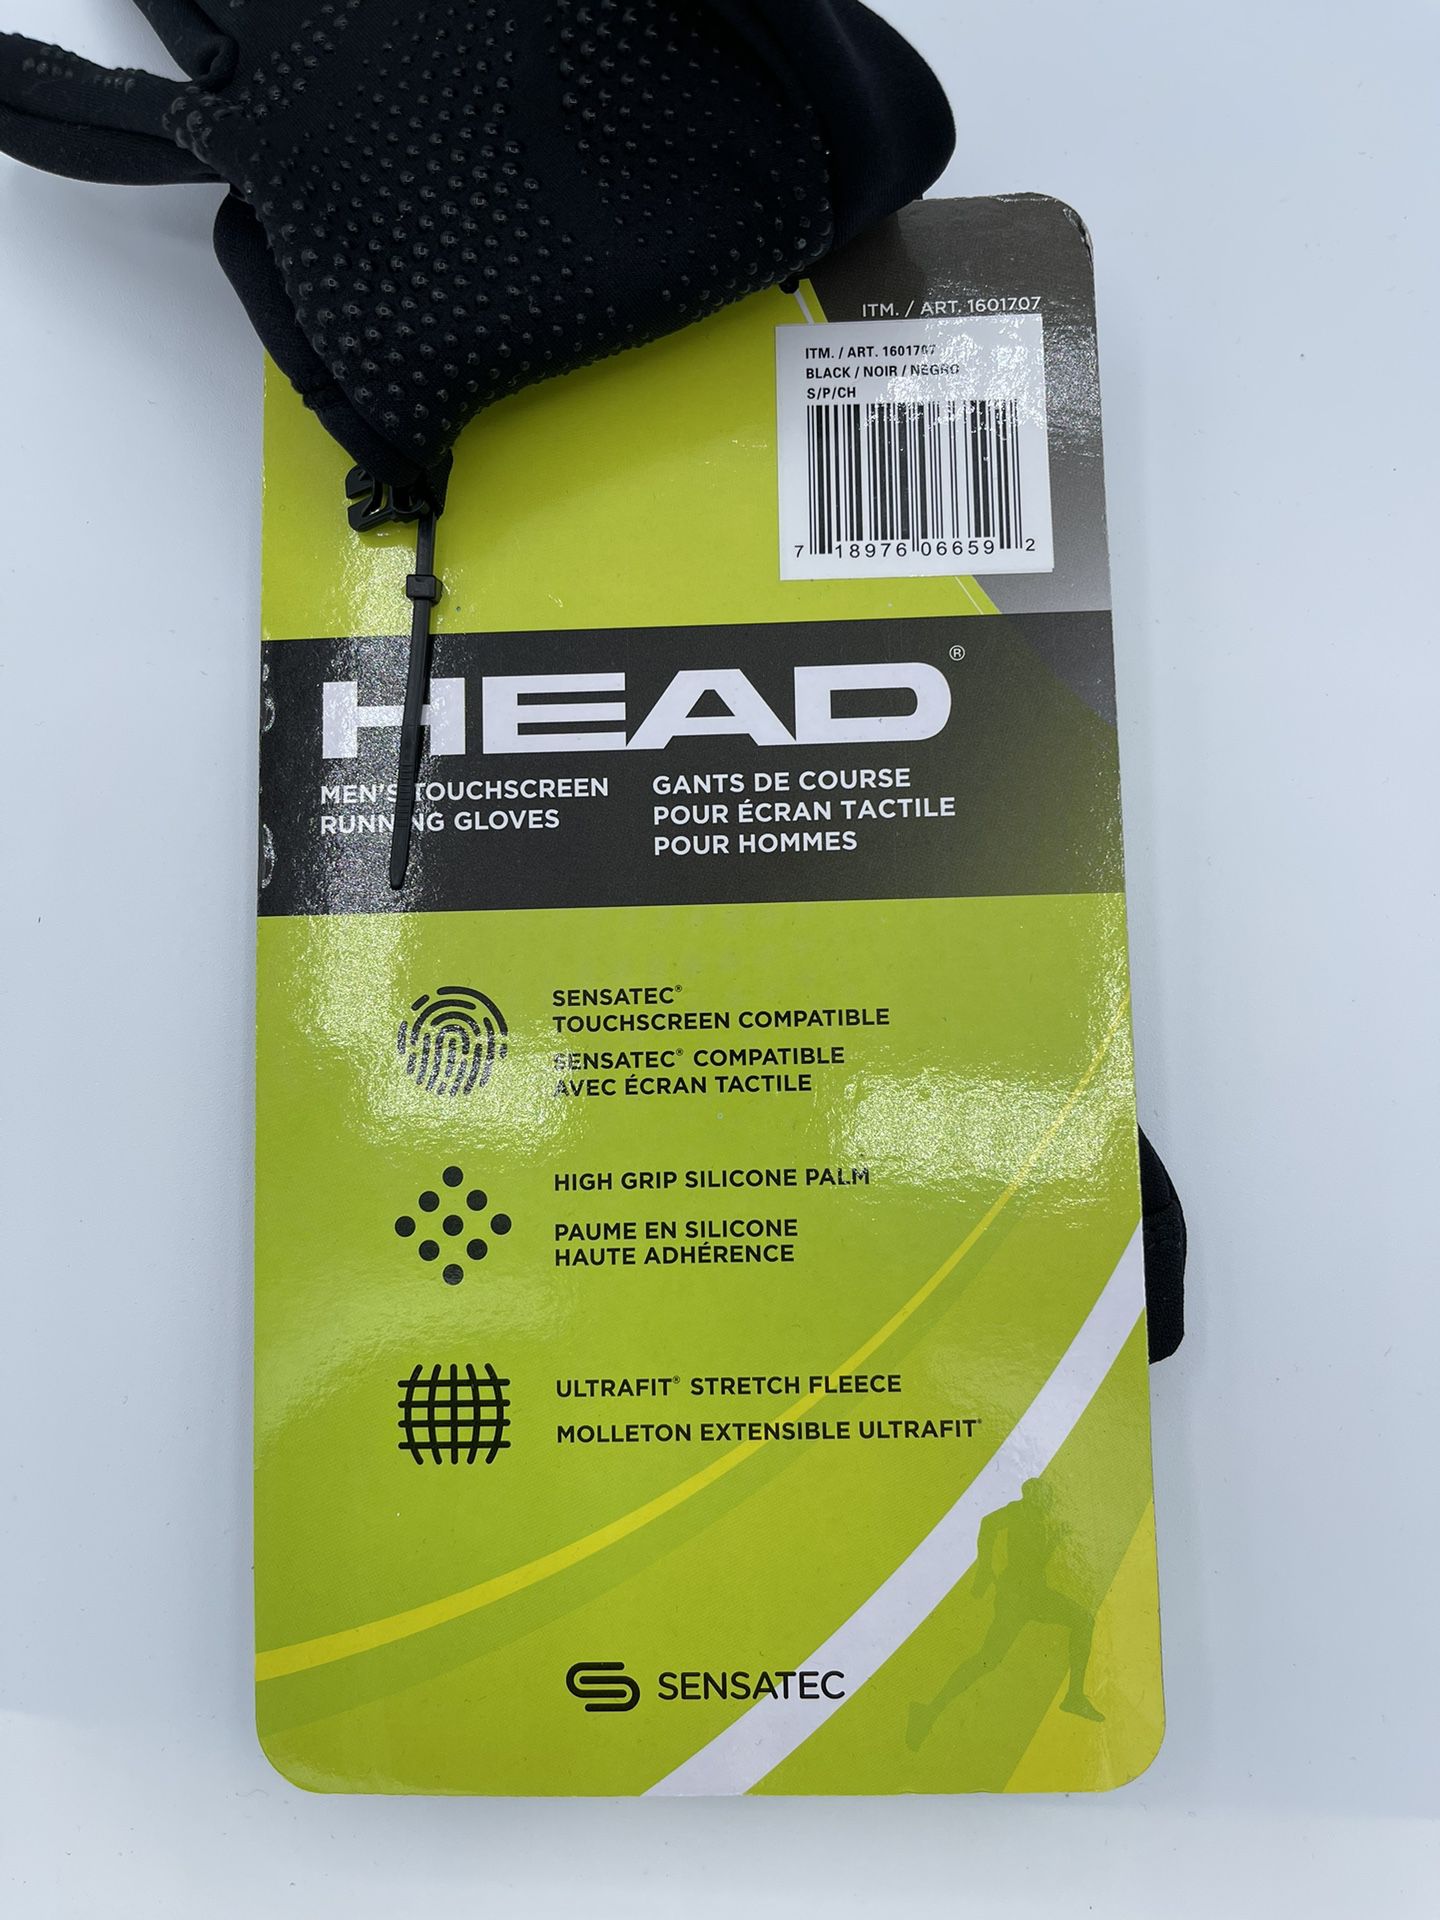 Head Men's Black Touchscreen Running Gloves - Size Small - New for Sale ...